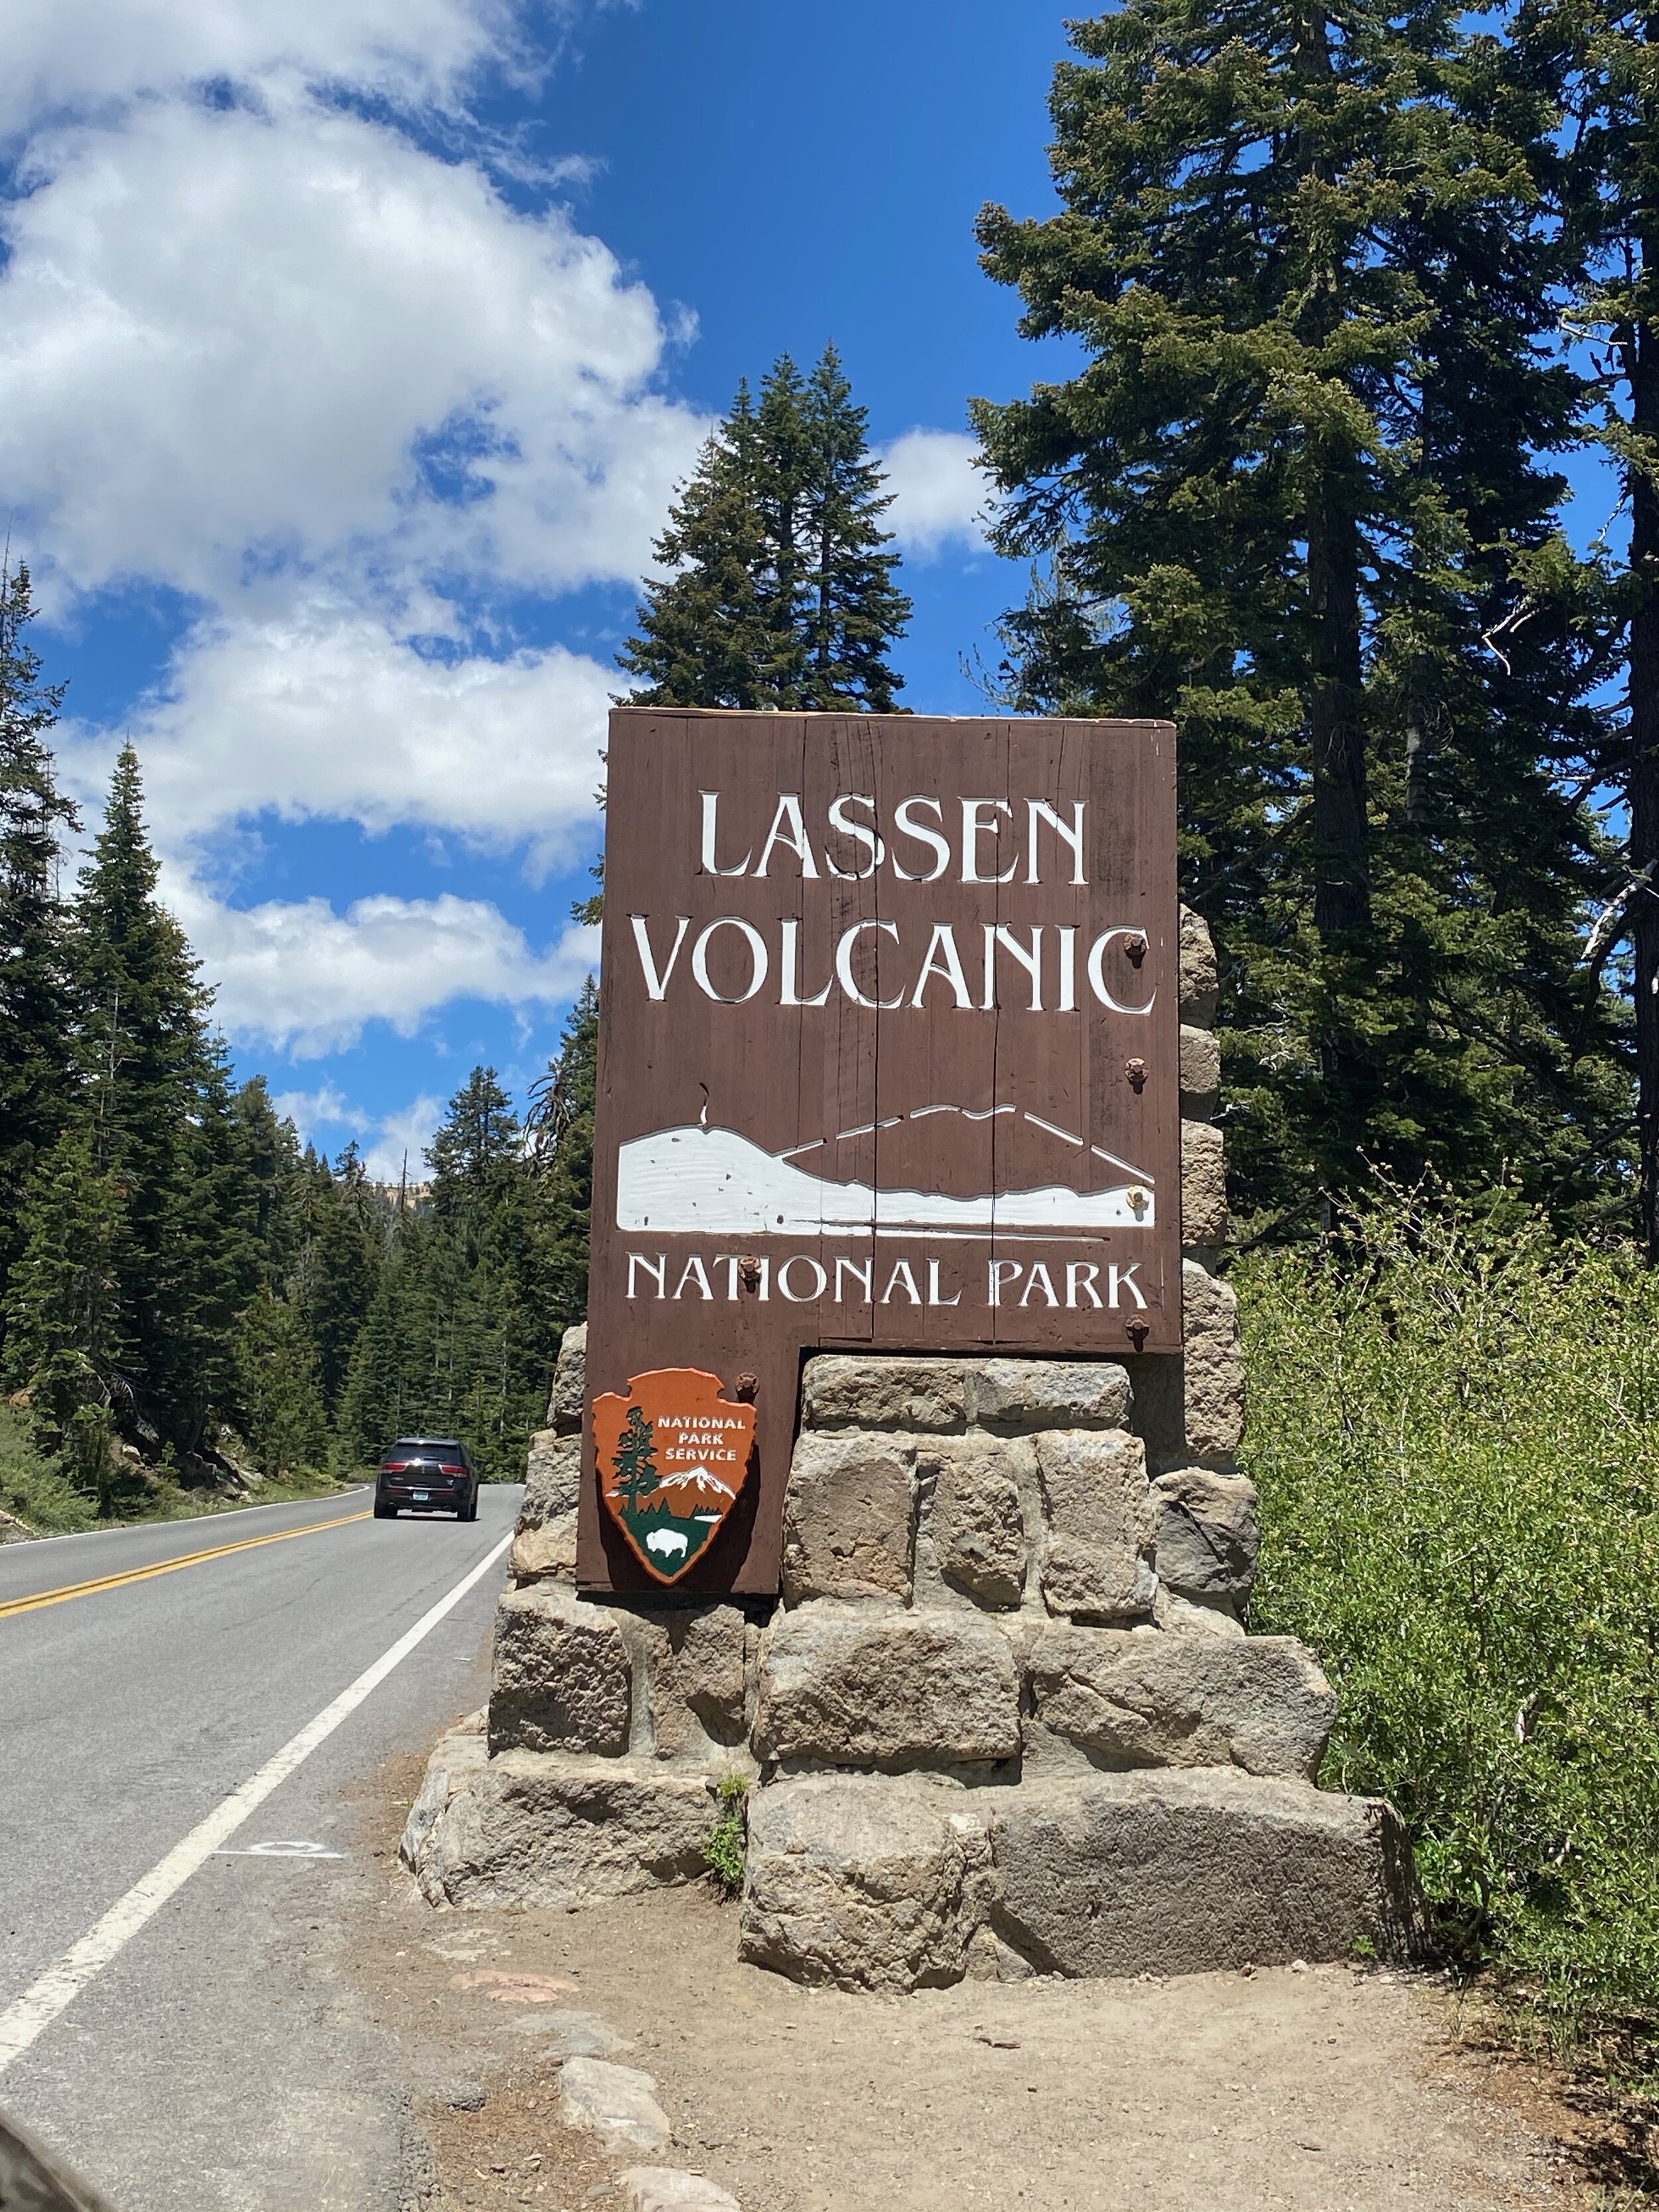 One of the welcome signs for Lassen Volcanic.  Photo by Karen Boudreaux, June 8, 2021